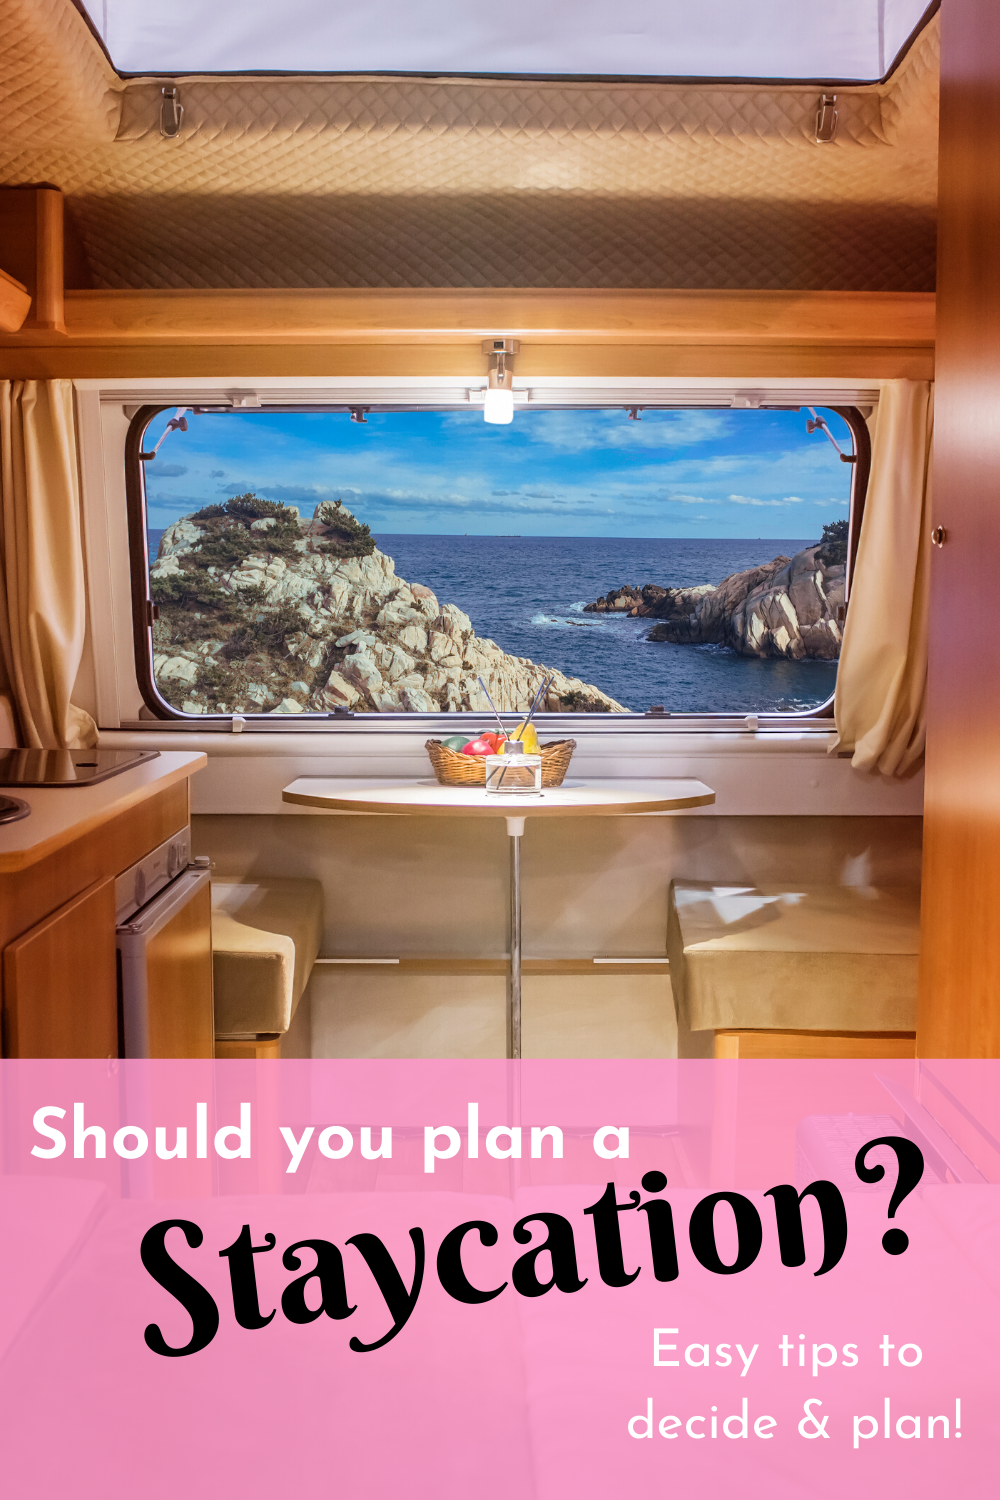 Should you Plan a Staycation for your Family?